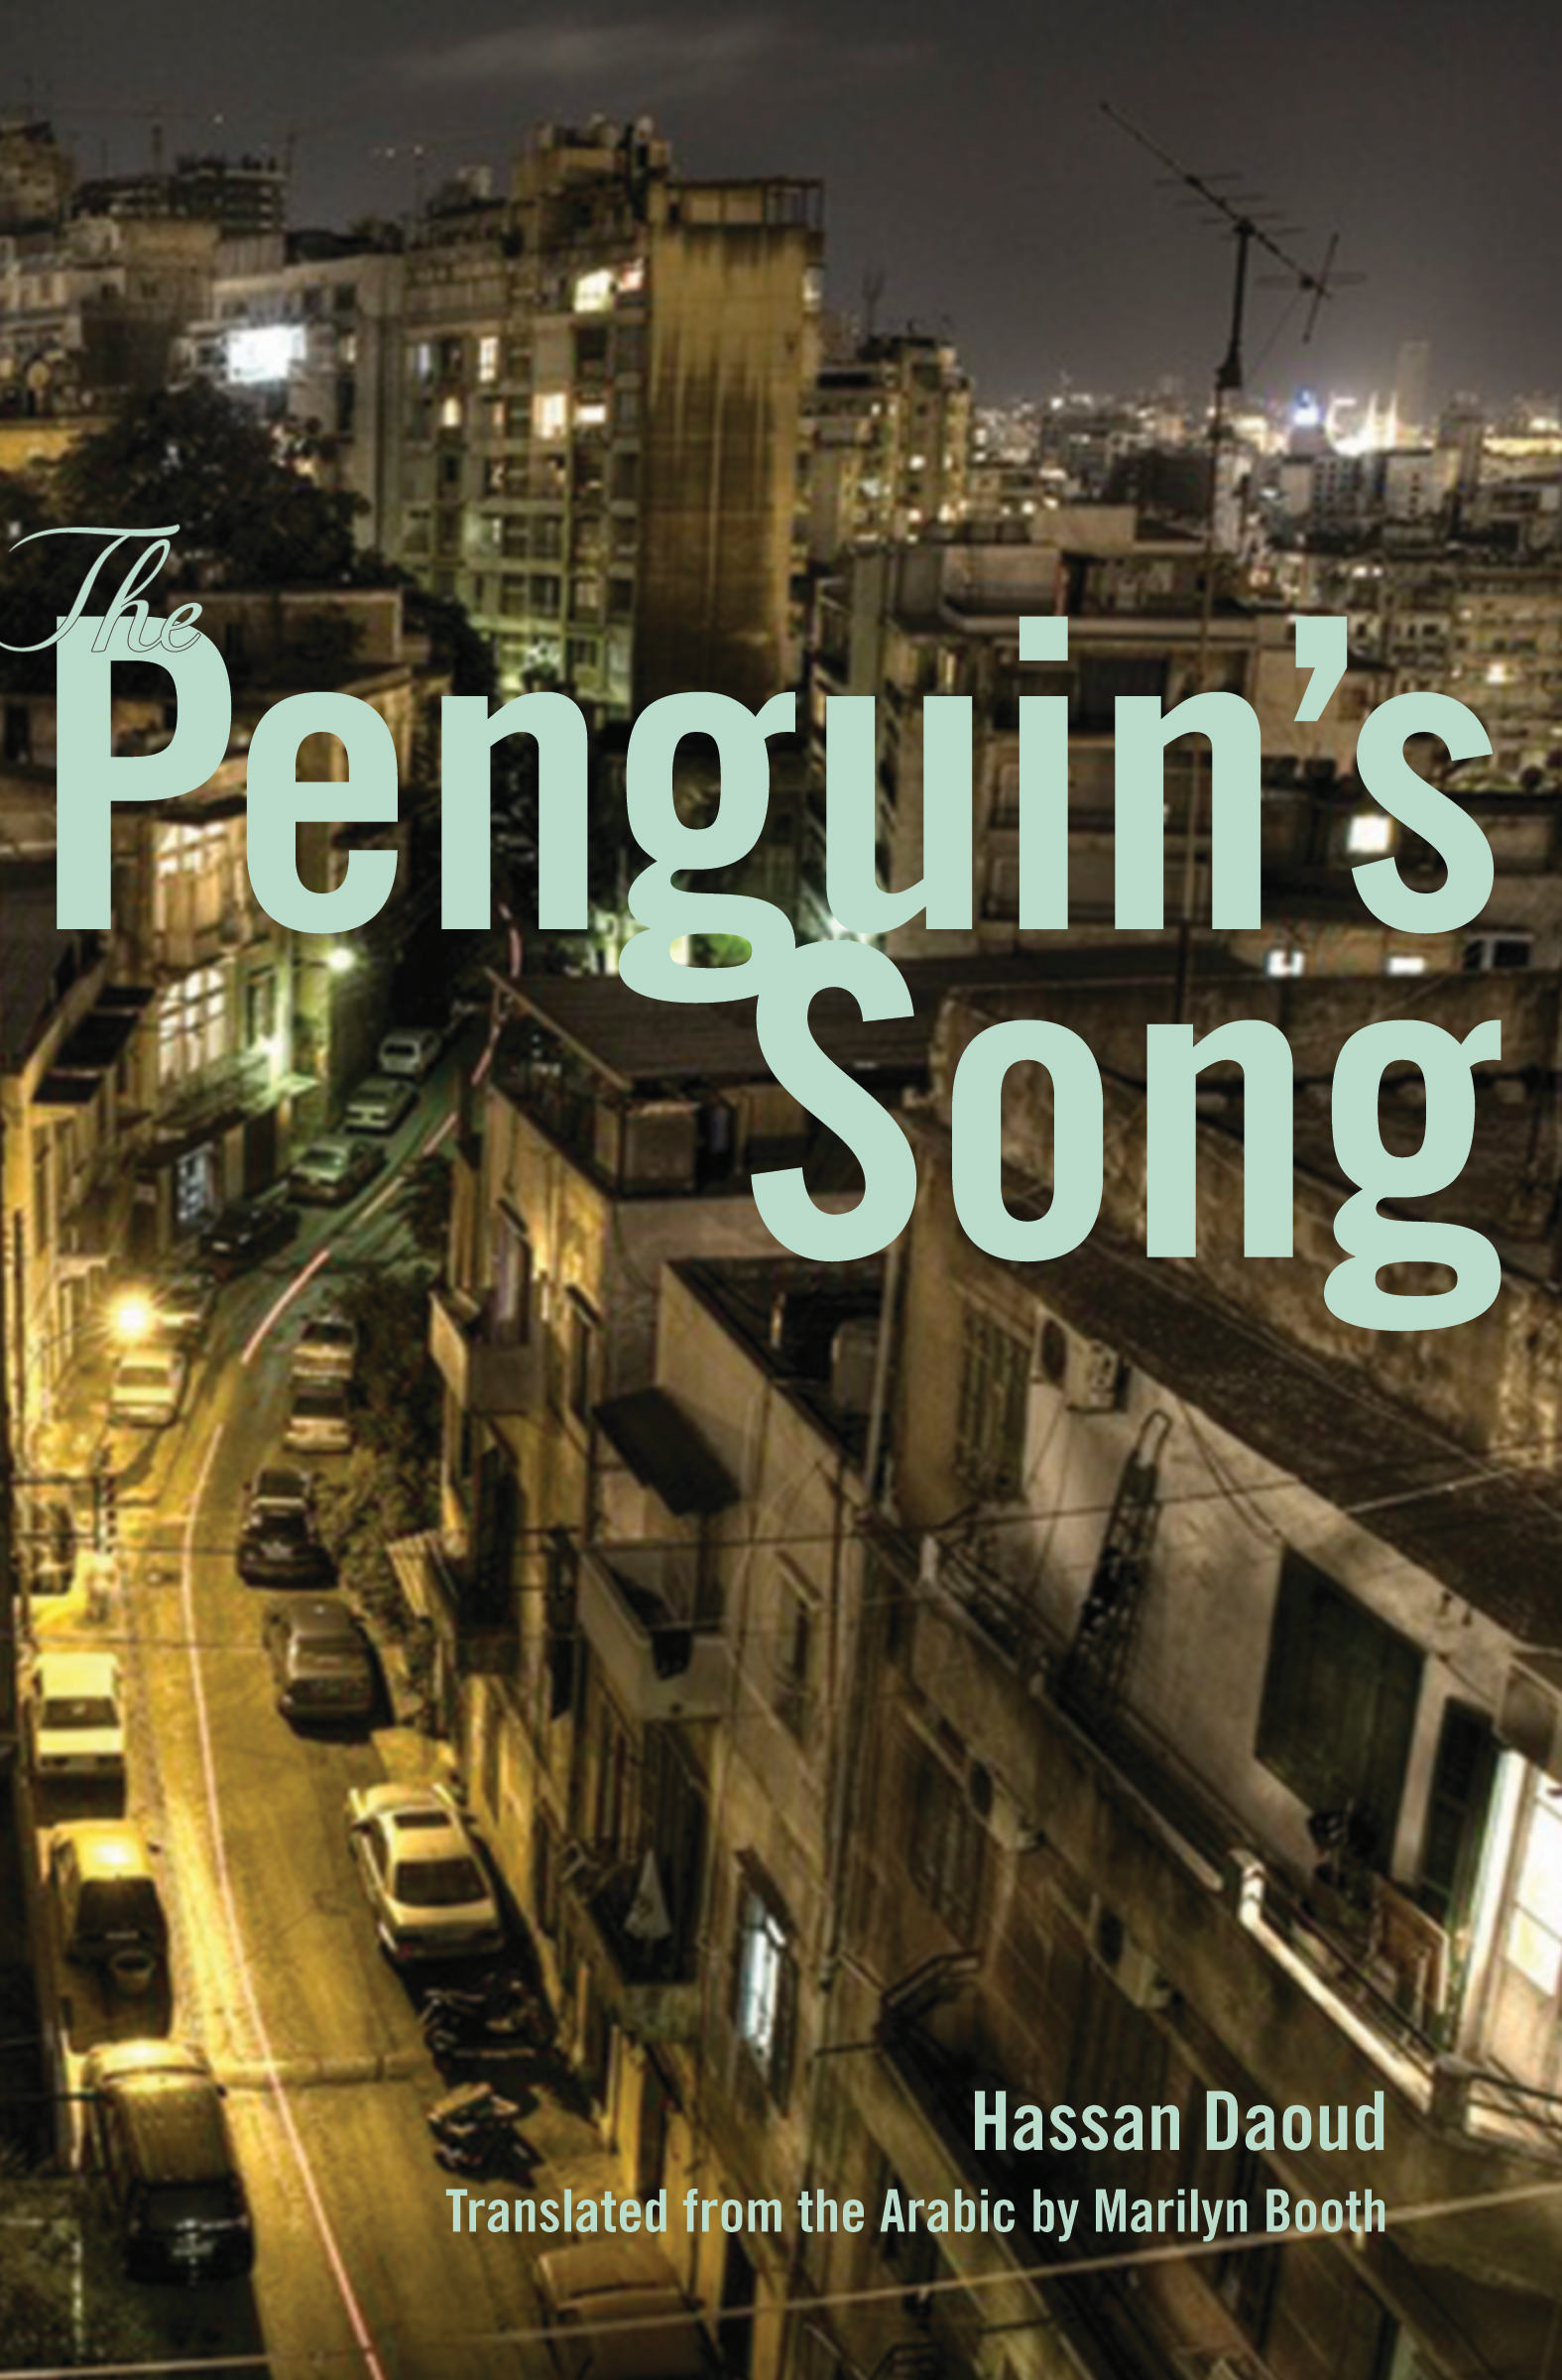 The Penguin's Song_book cover